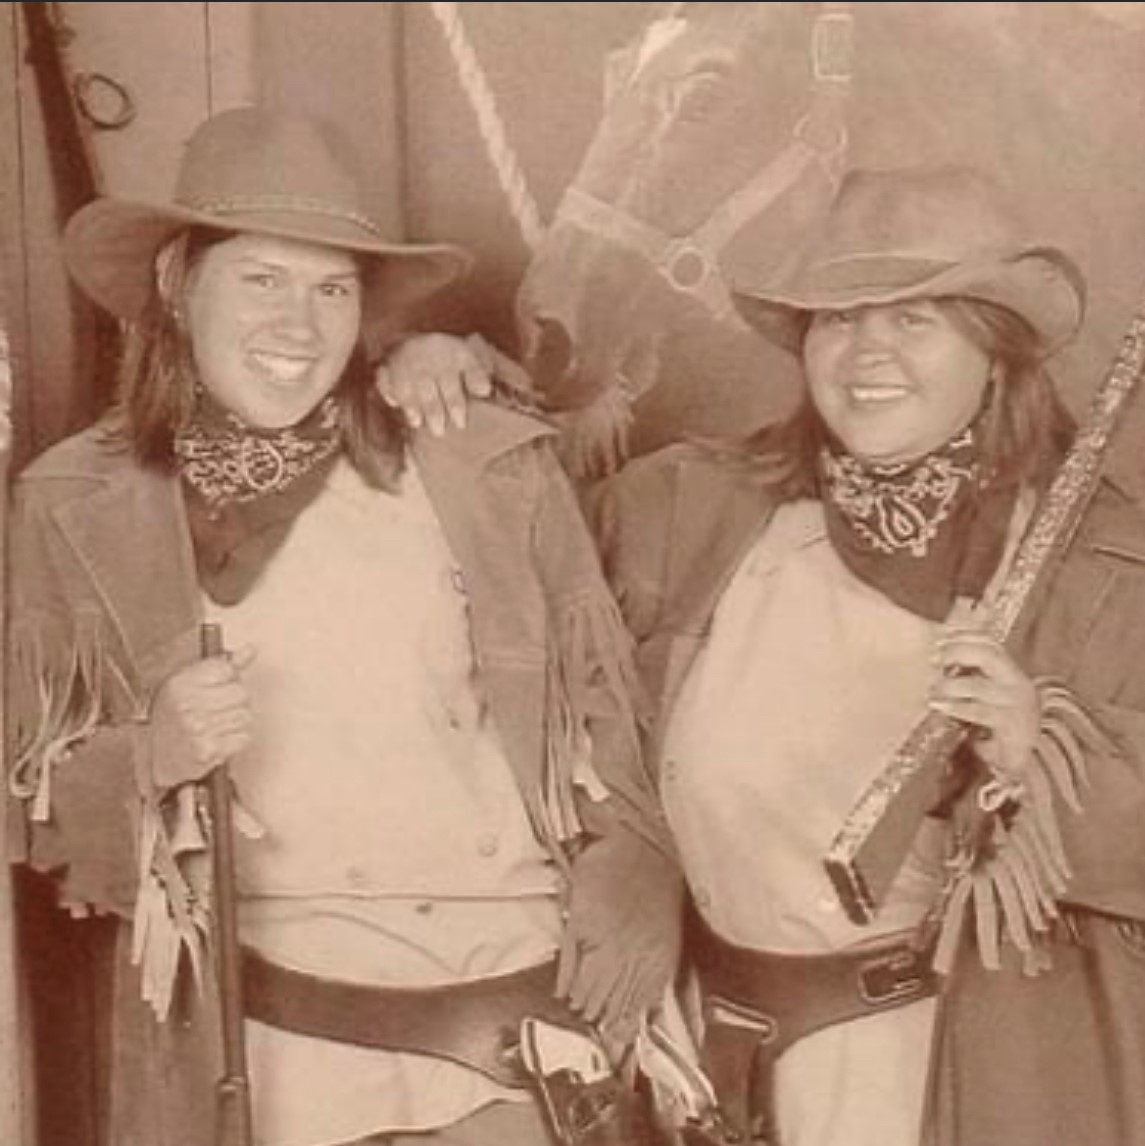 Two women dressed up in Western gear pose for a picture.